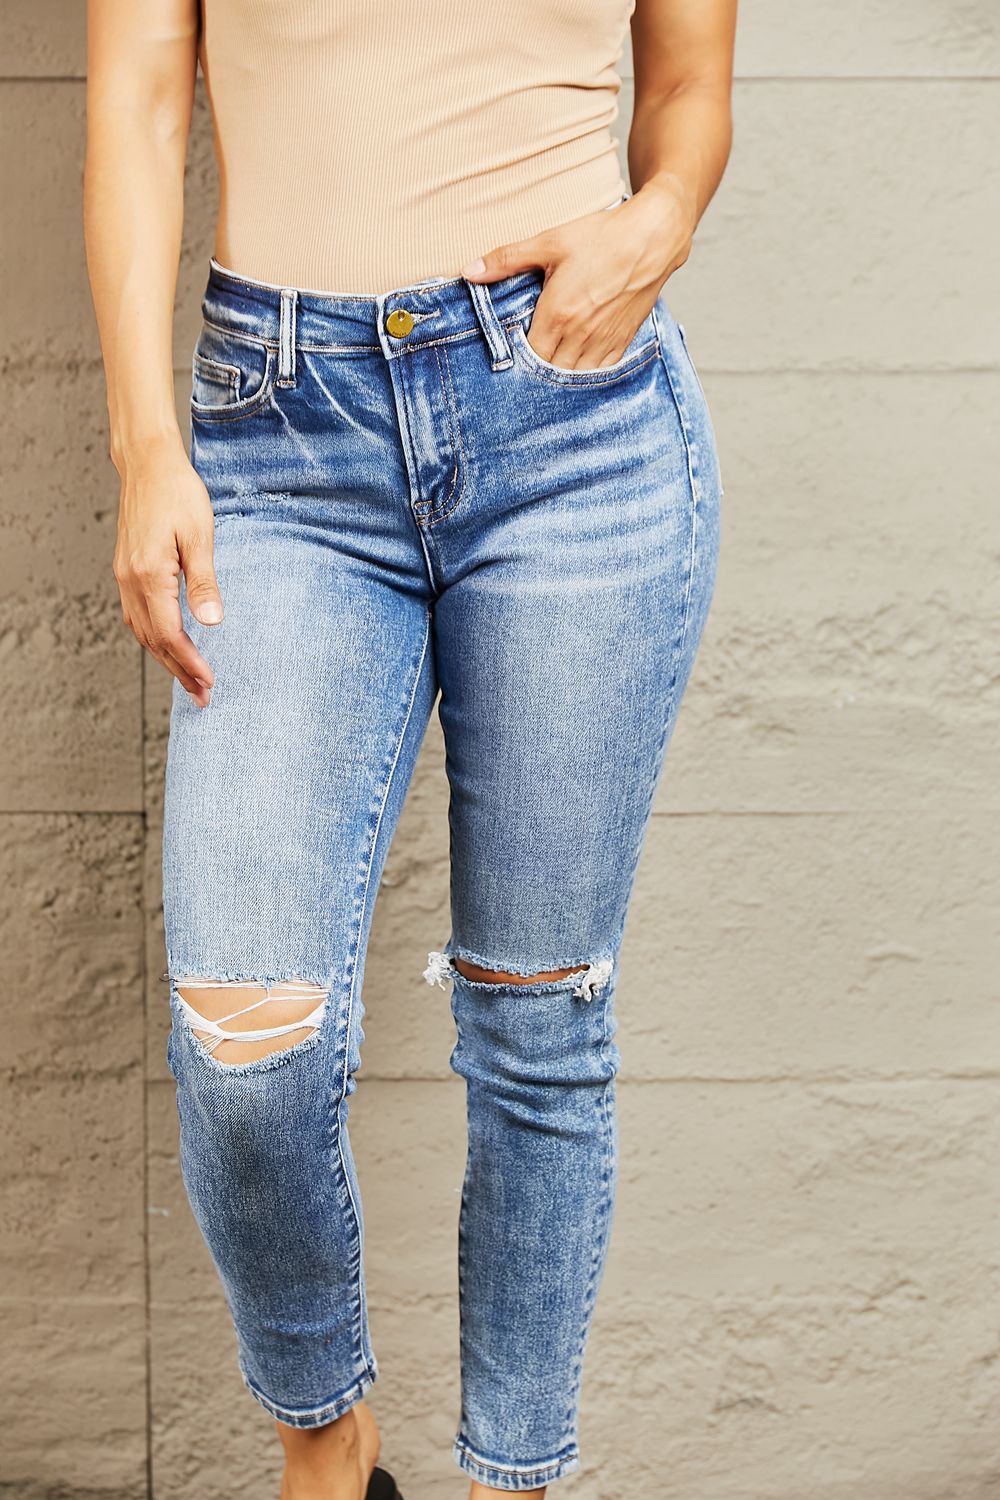 BAYEAS Mid Rise Distressed Skinny Jeans - Alonna's Legging Land